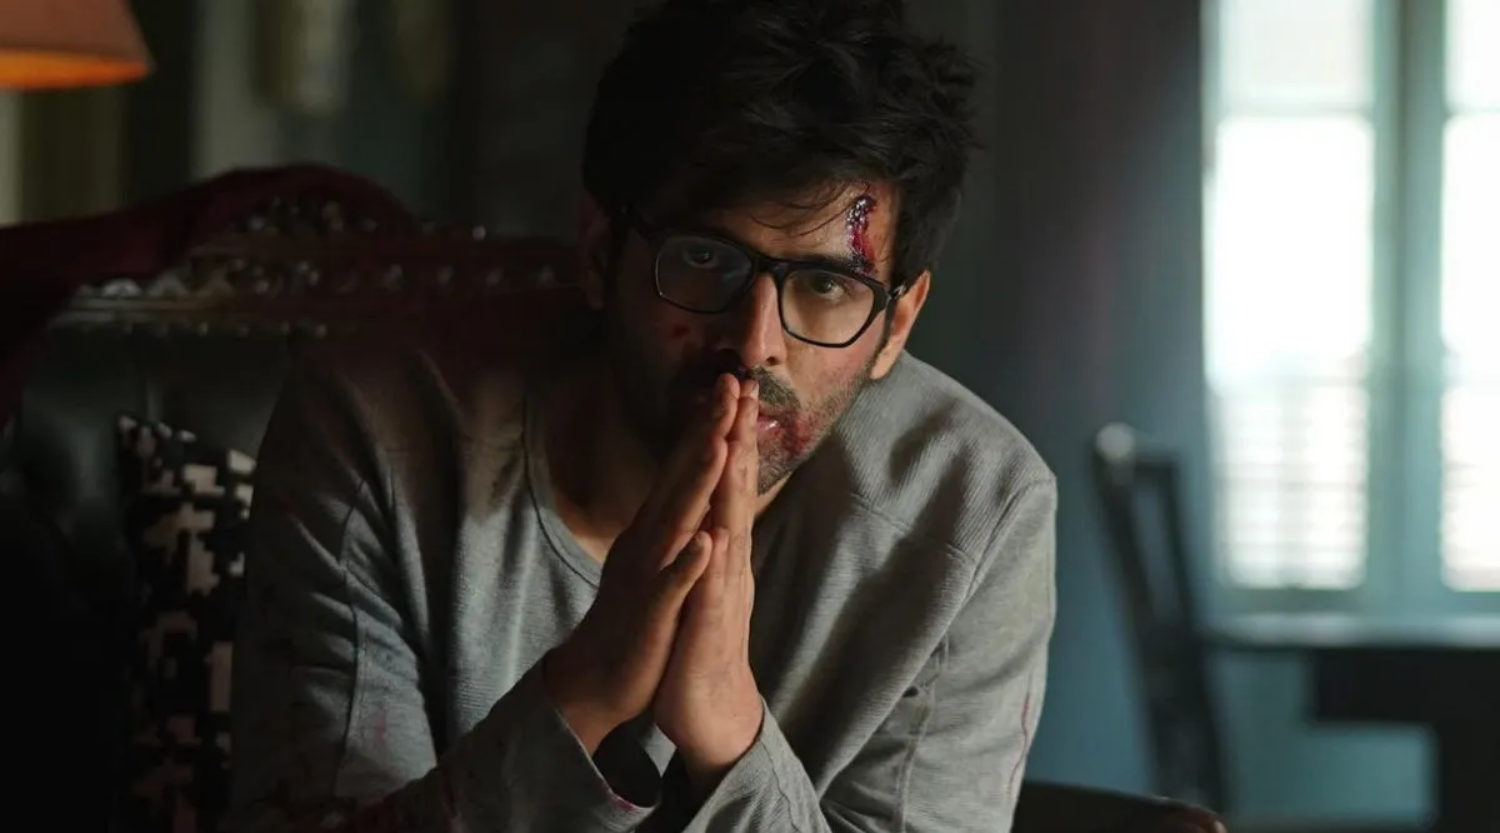 Kartik Aaryan became a ‘loner’ while filming Freddy: ‘I was the quiet one on sets’